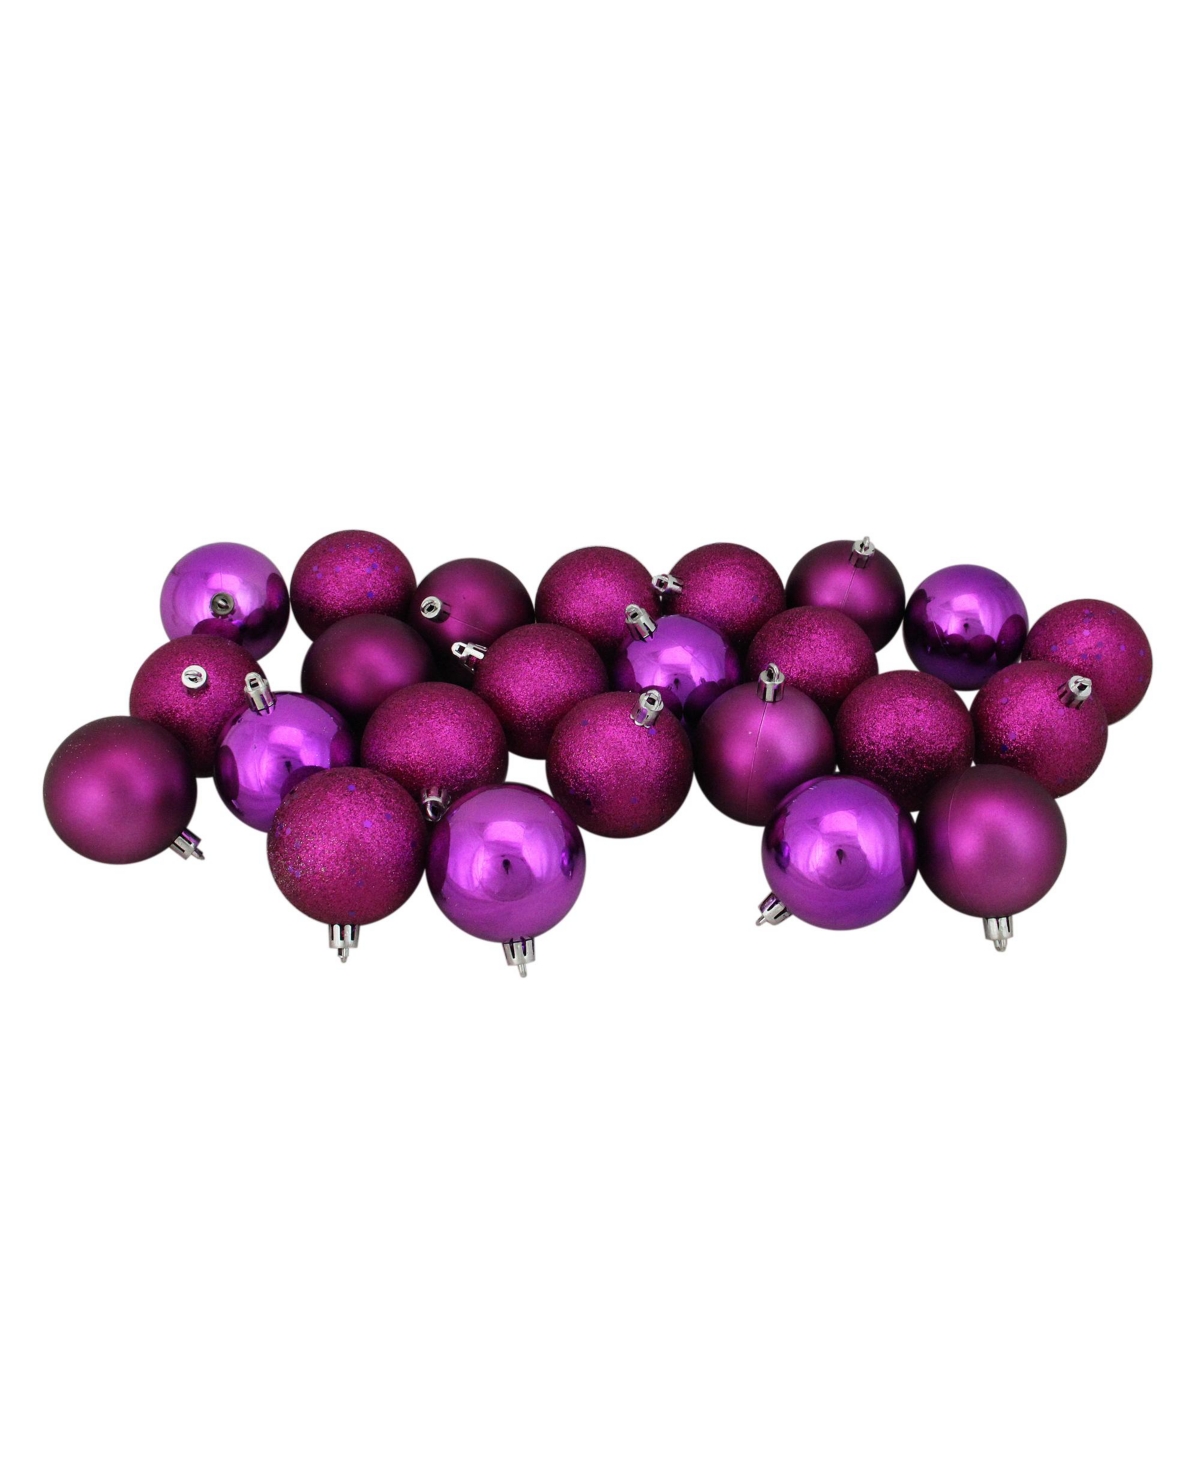 Northlight 24 Count Shatterproof 4- Finish Christmas Ball Ornaments 60mm Set, 2.5" In Purple